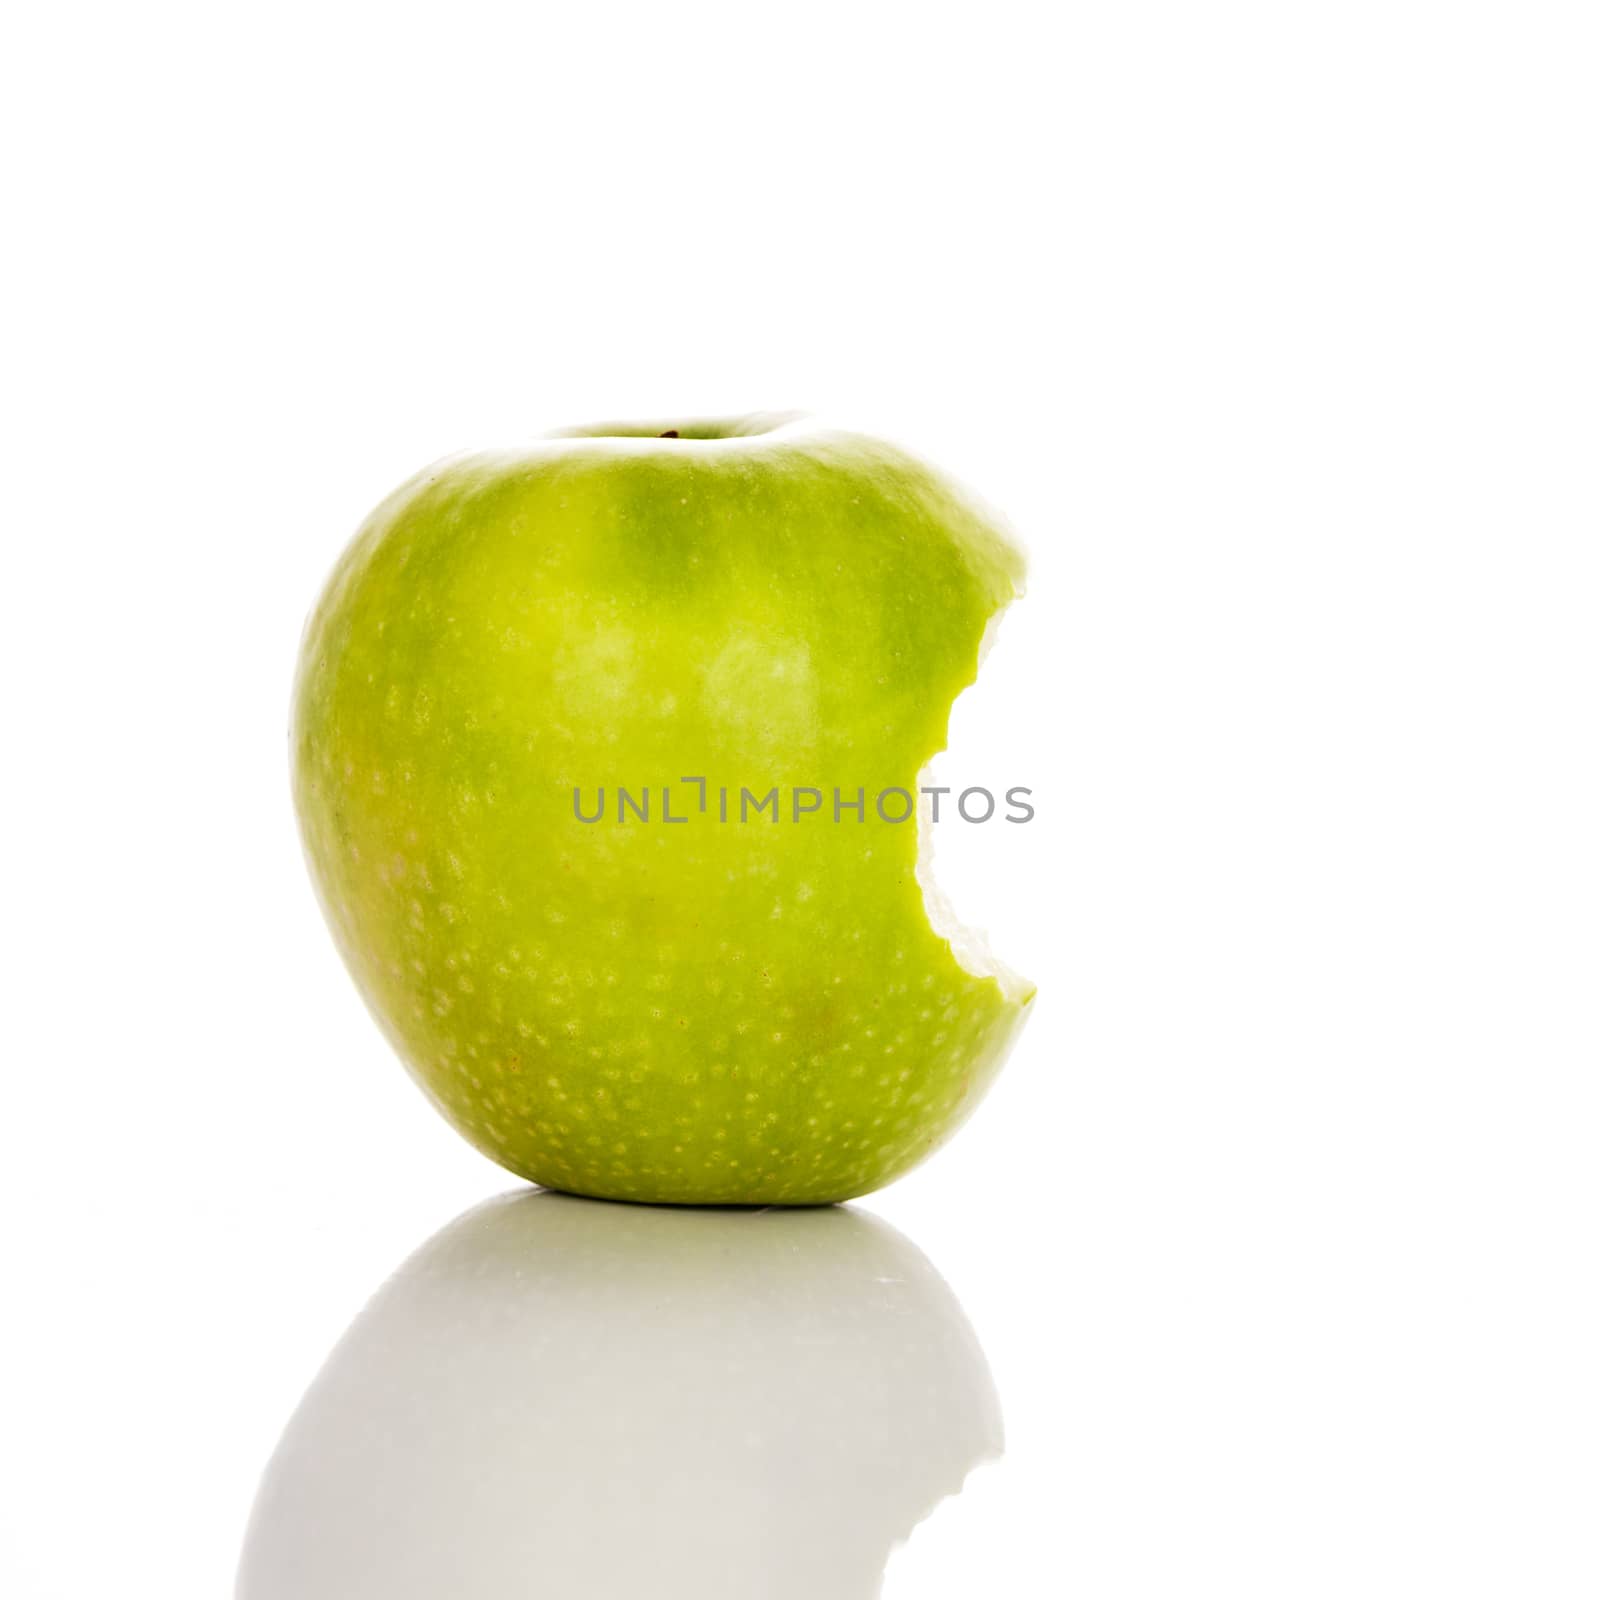 image of bitten green apple by vwalakte